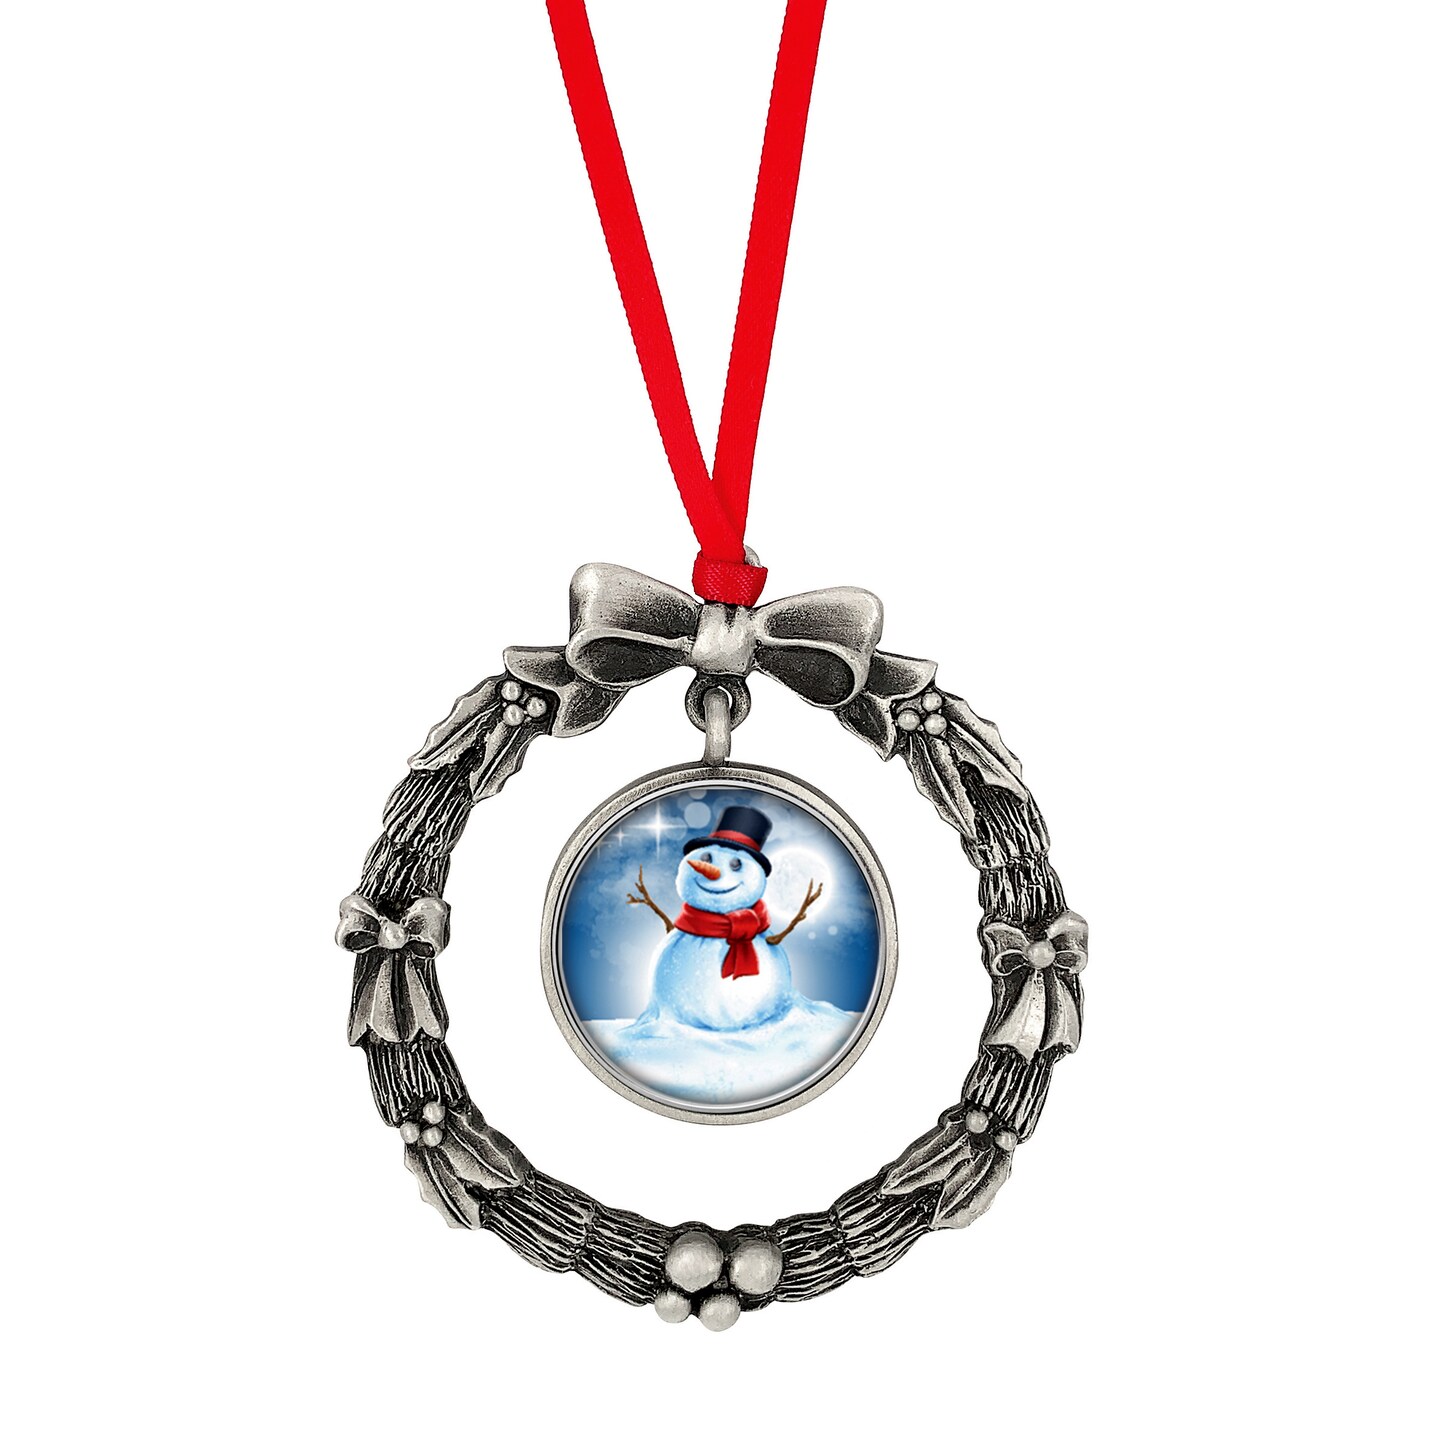 Wreath Ornament With Colorized Quarter Snowman Coin